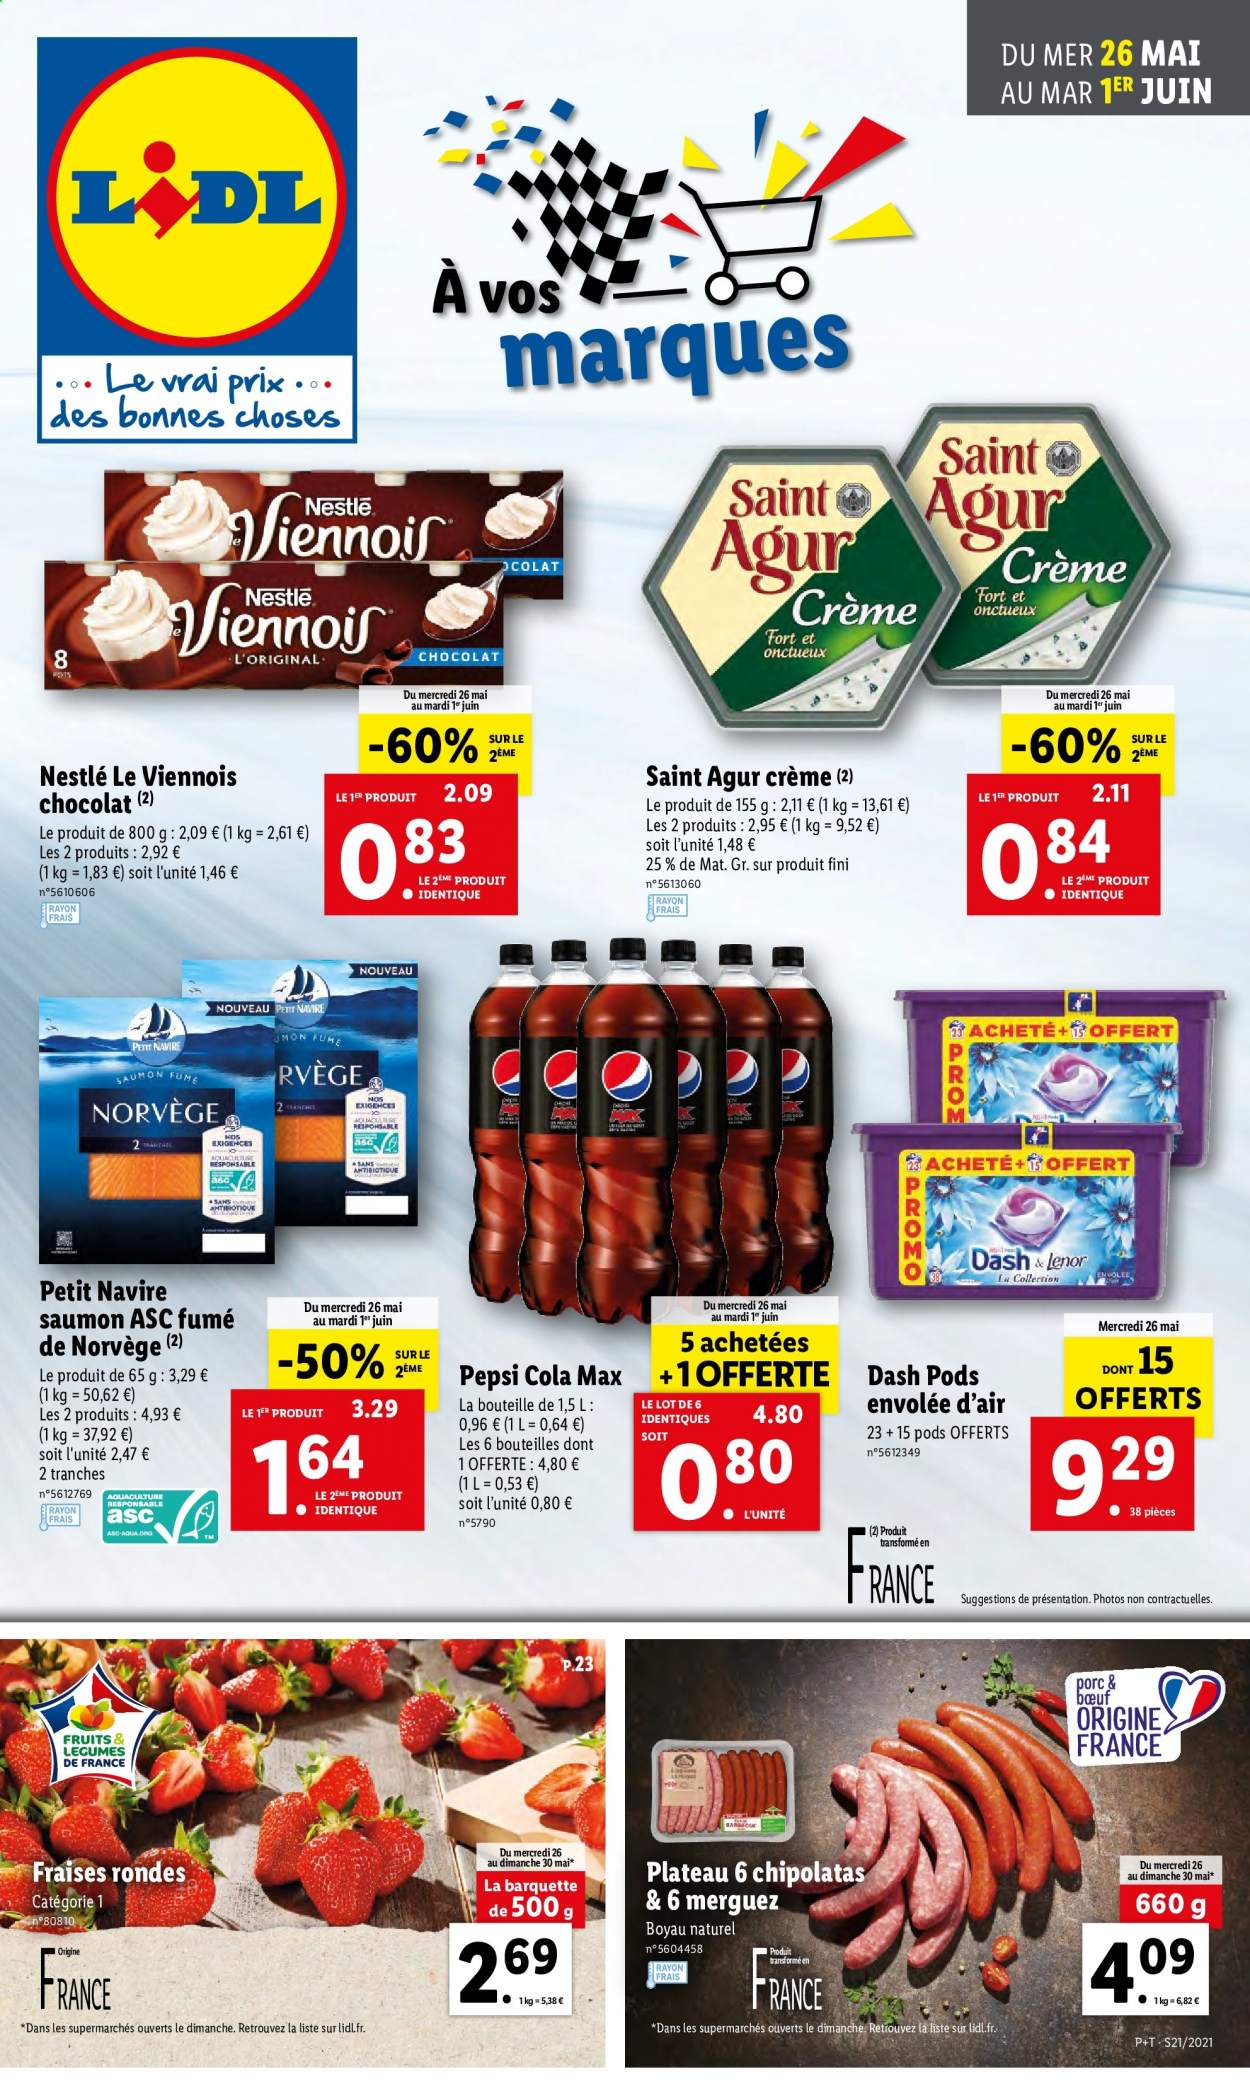 Catalogue Lidl - 26.05.2021 - 01.06.2021. Page 1.